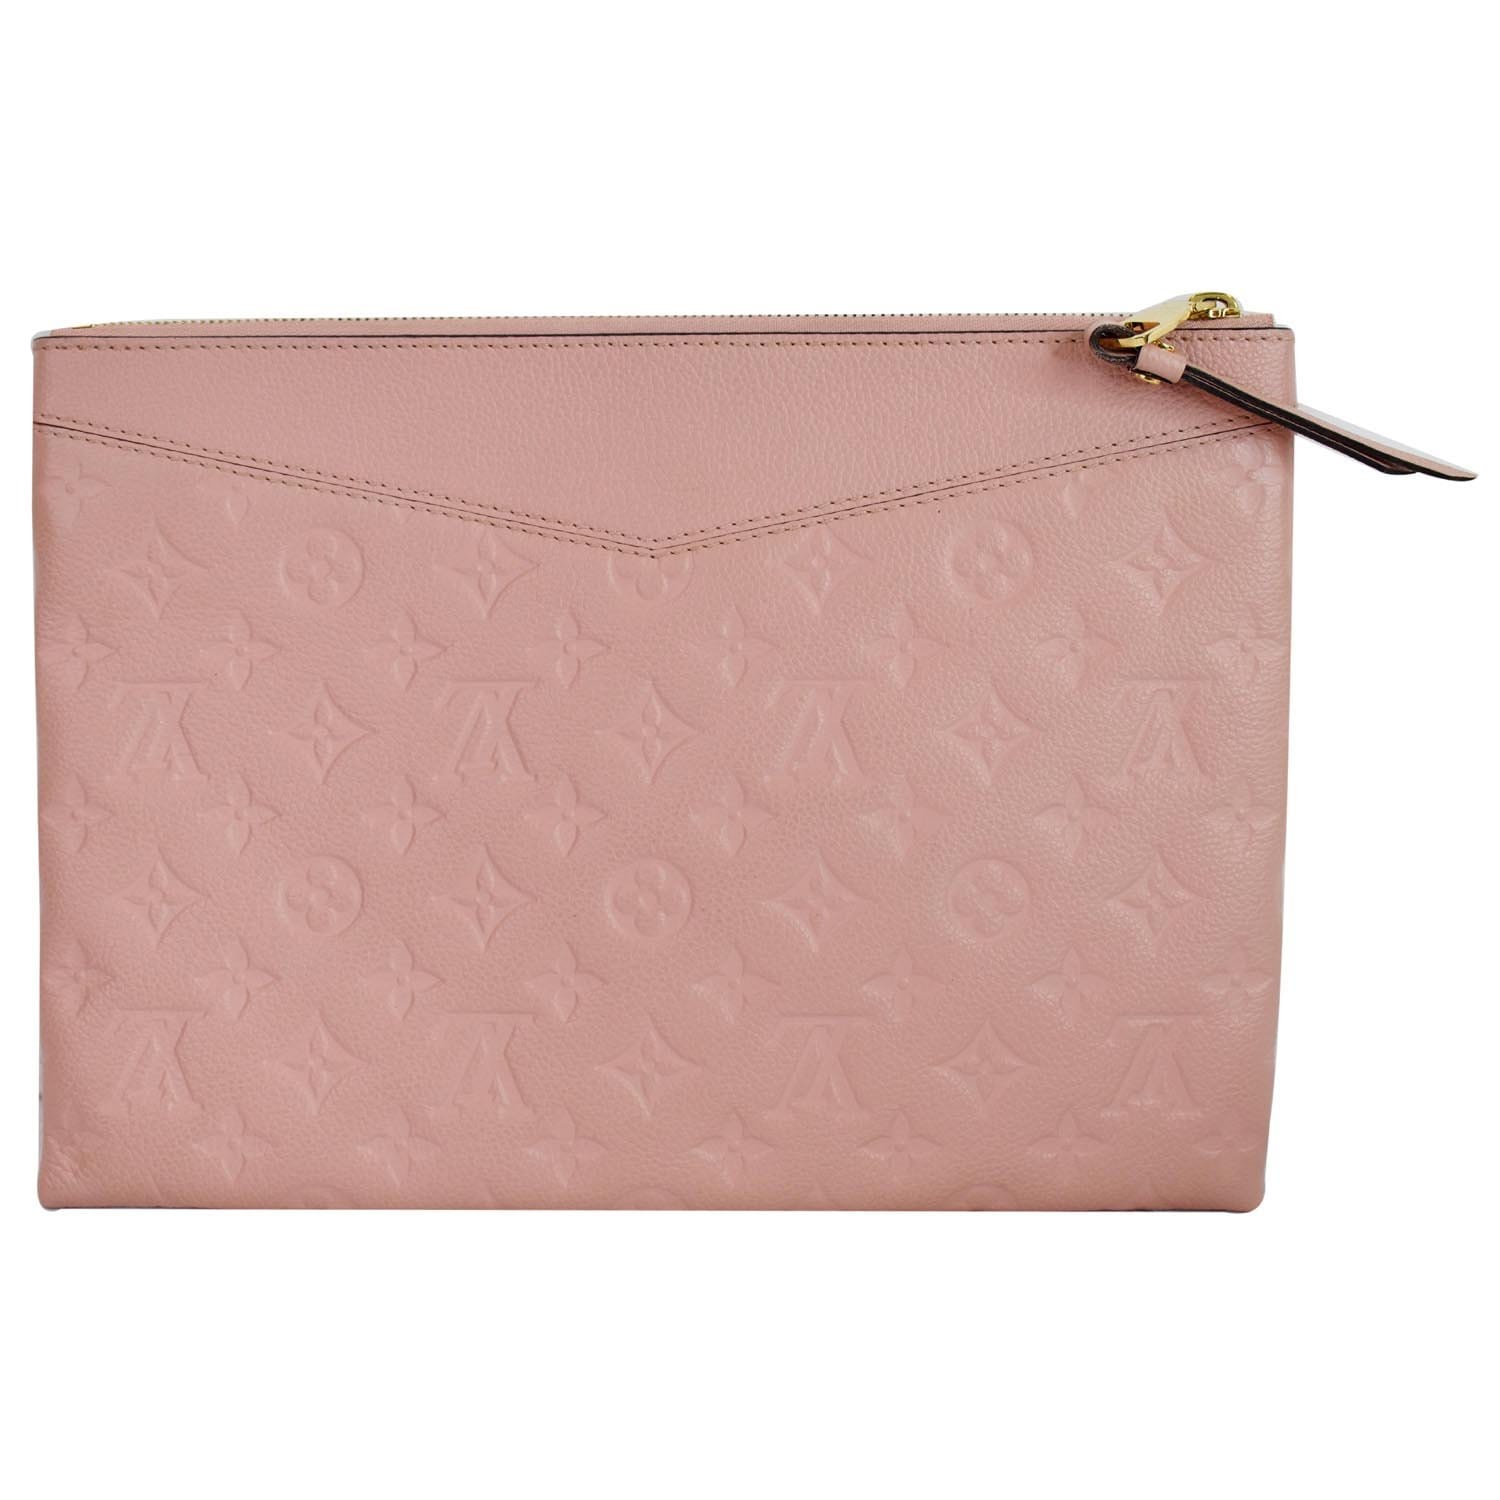 Daily Pouch Monogram - Women - Small Leather Goods